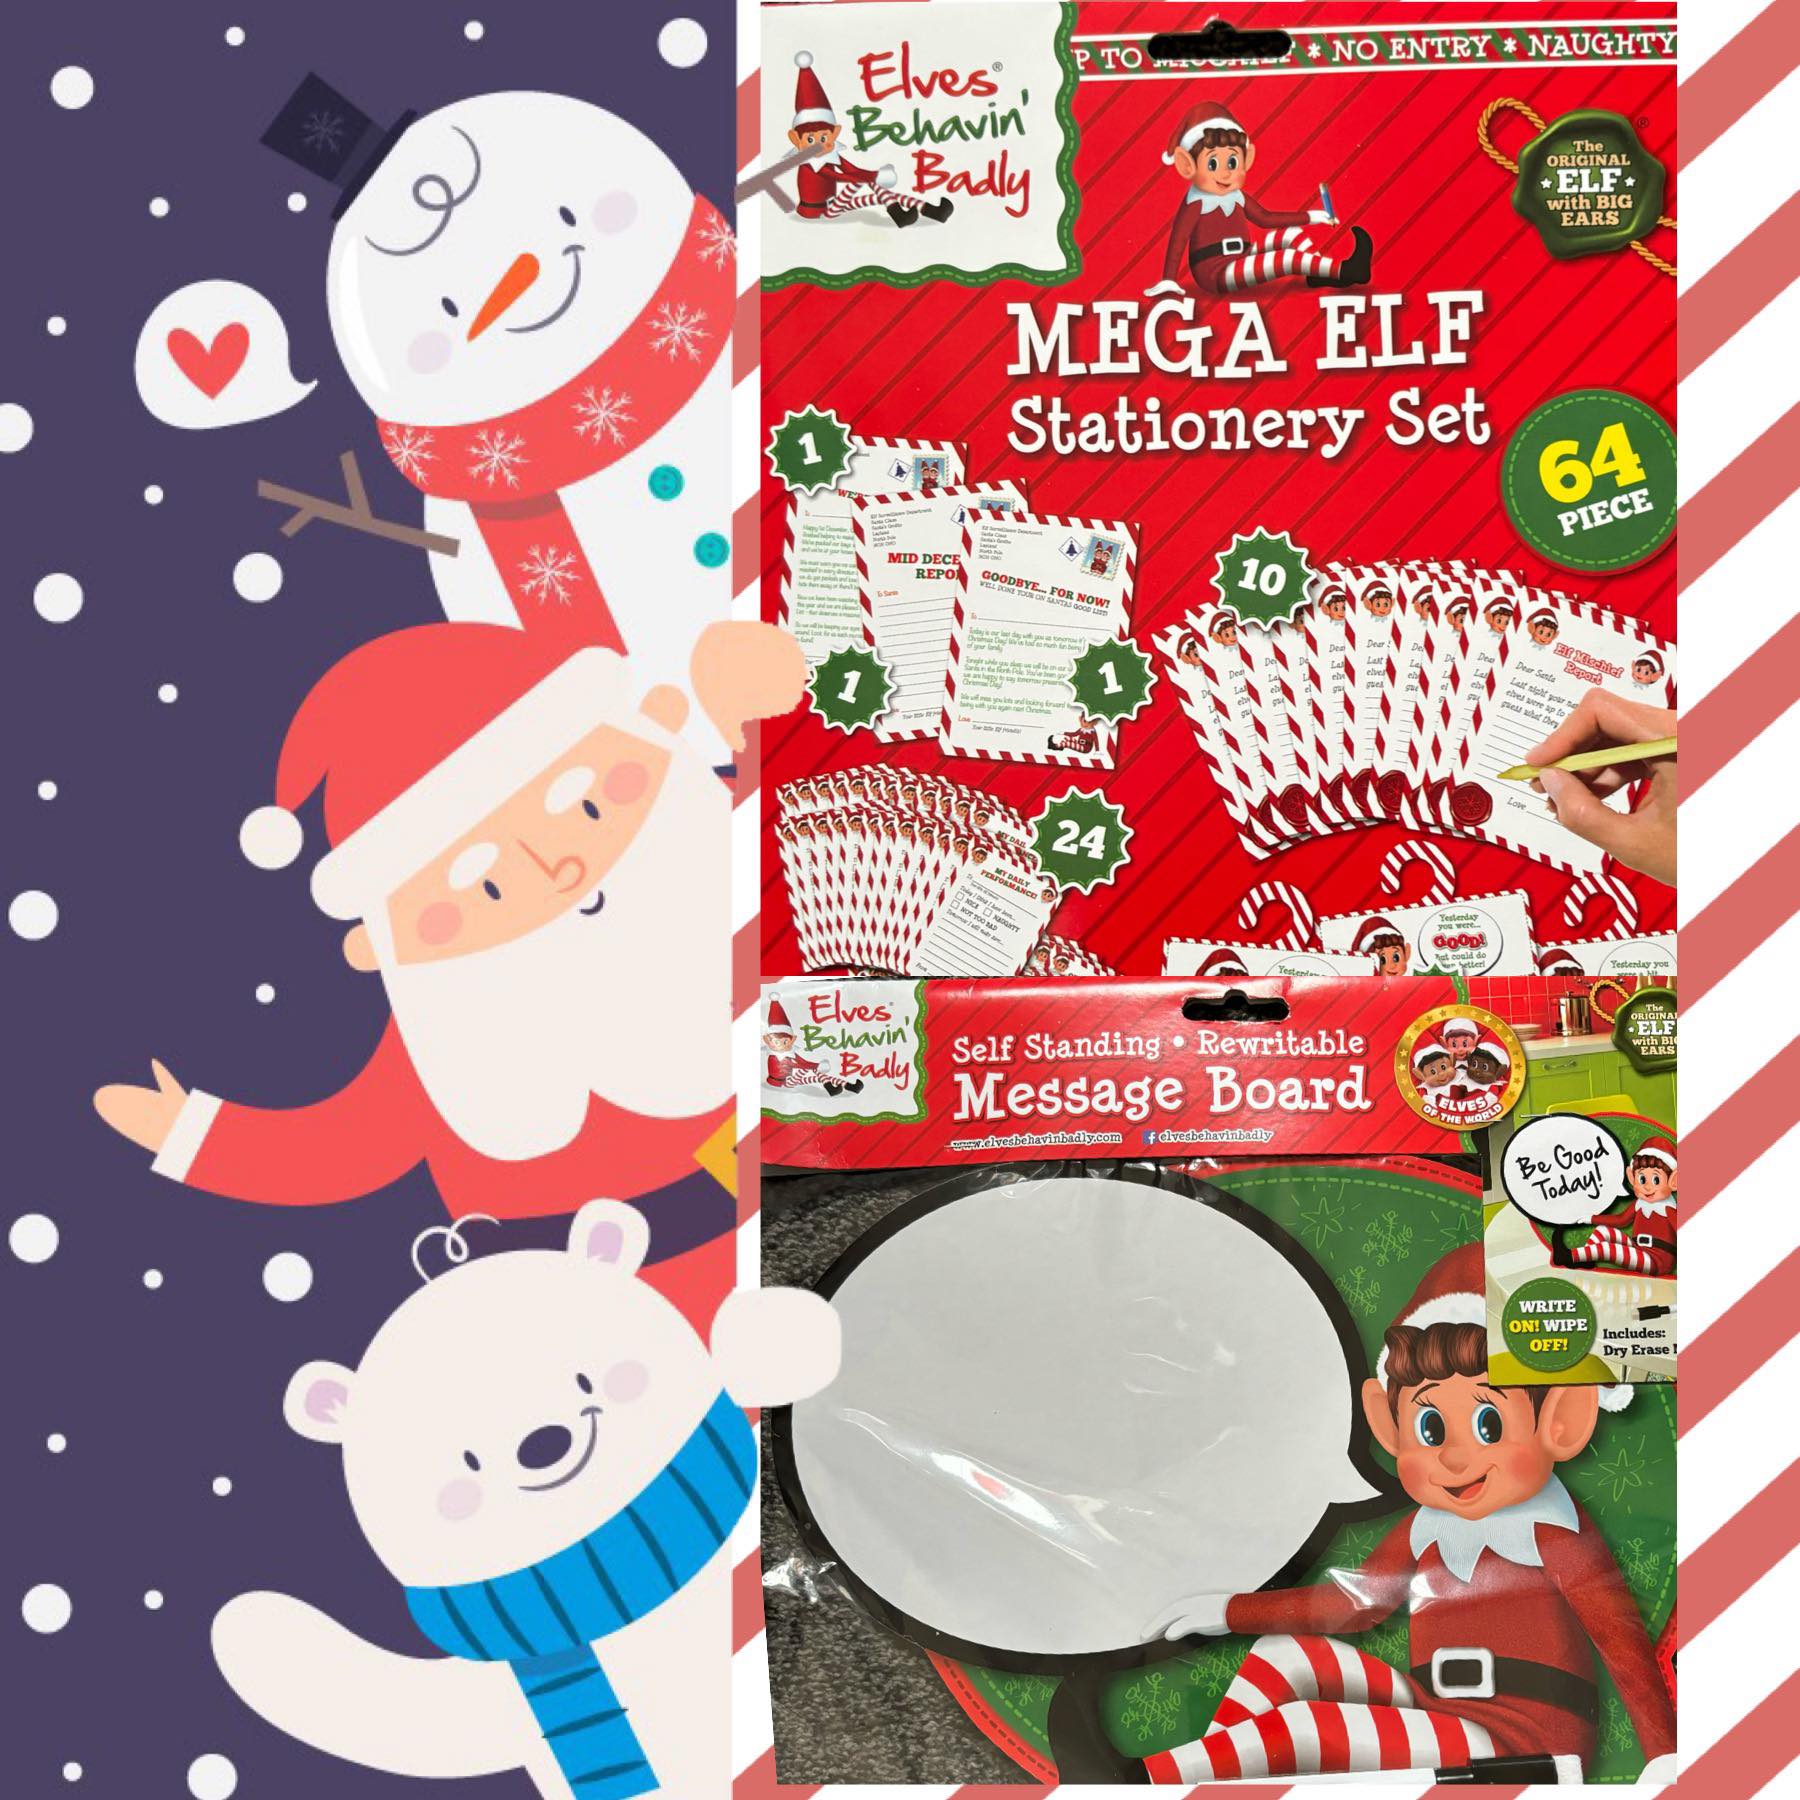 Win an Elf on The Shelf Goodie pack from Chiang Mai Kids